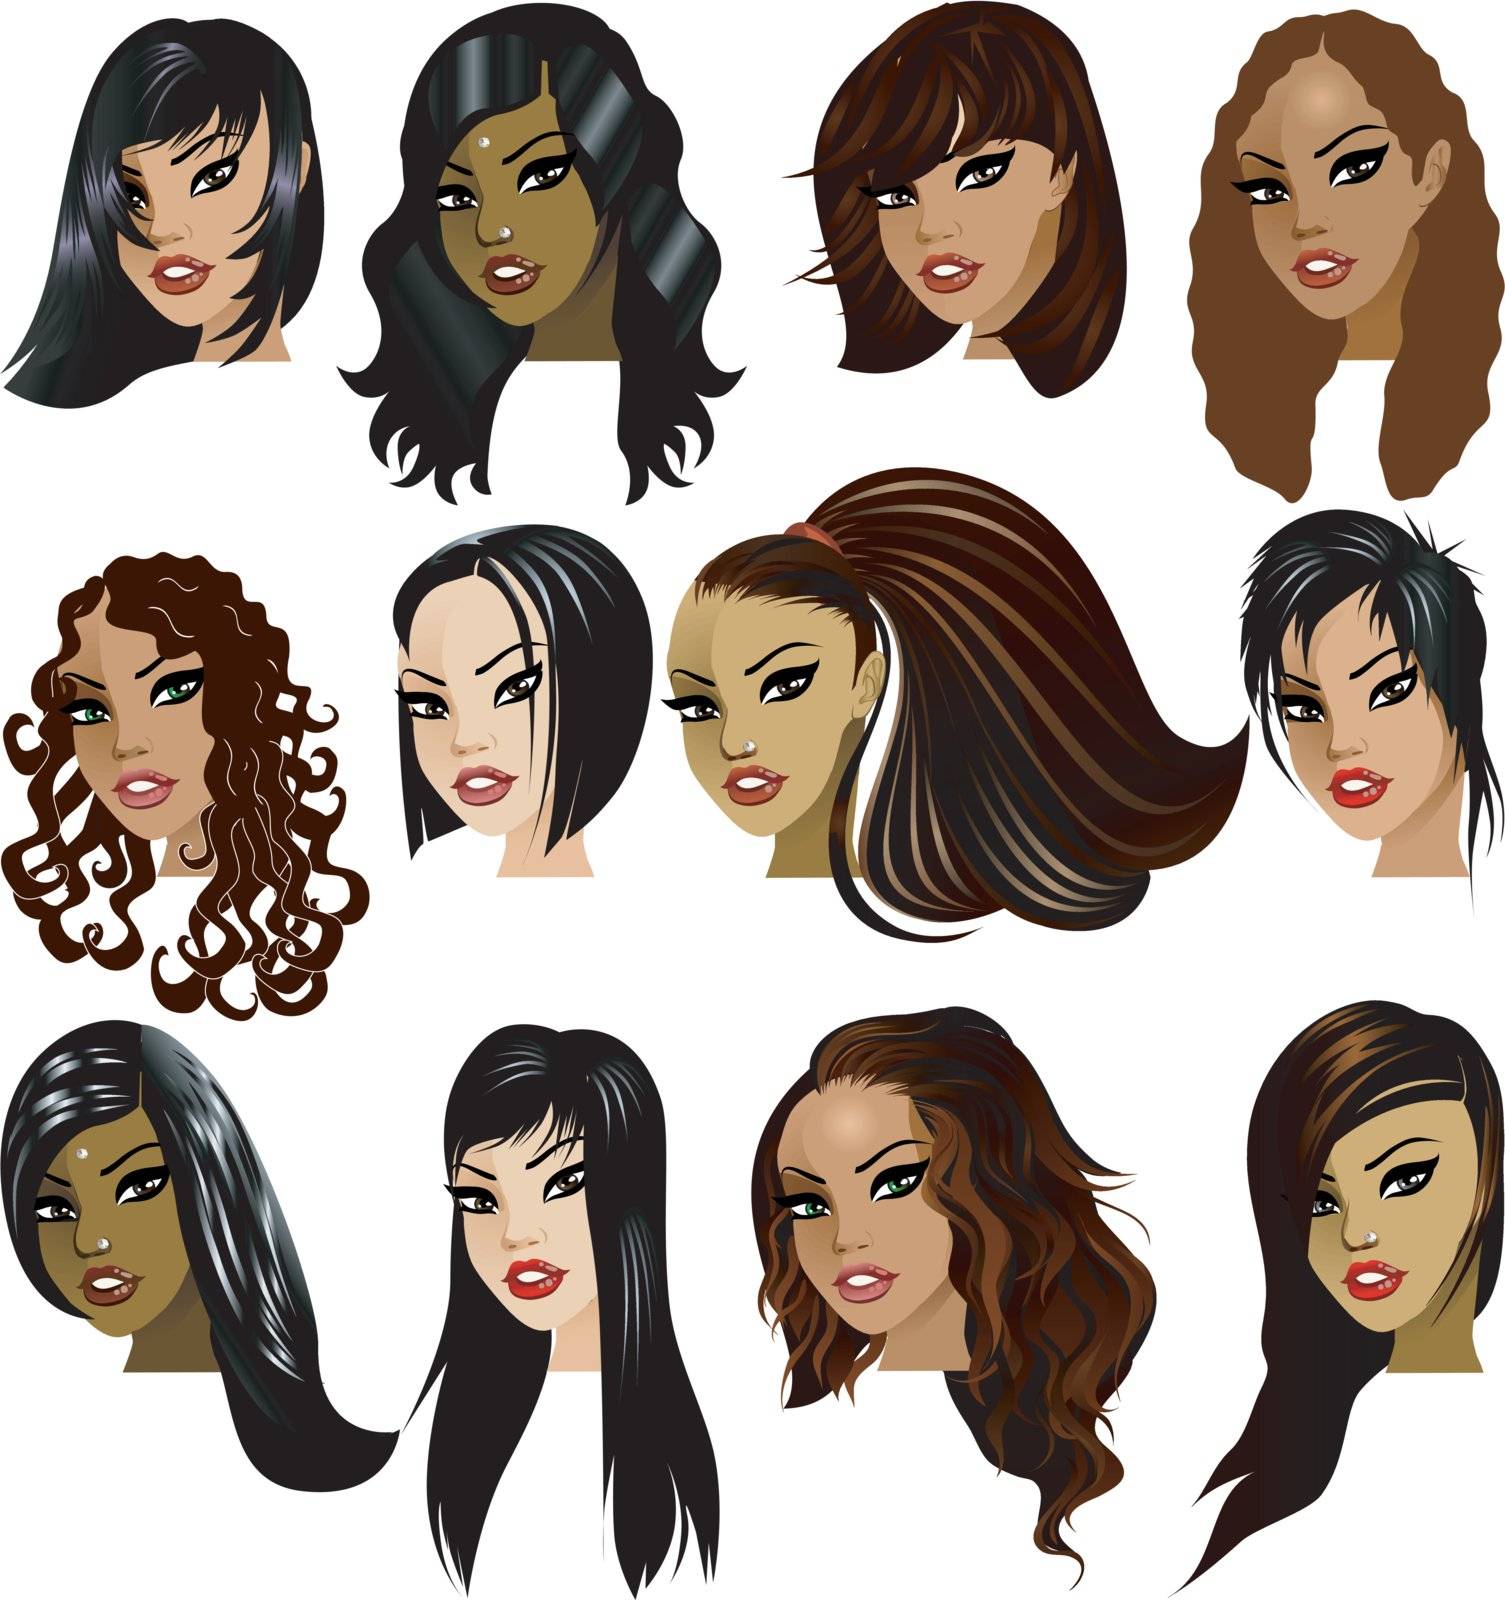 Brunette Women Faces by basheeradesigns